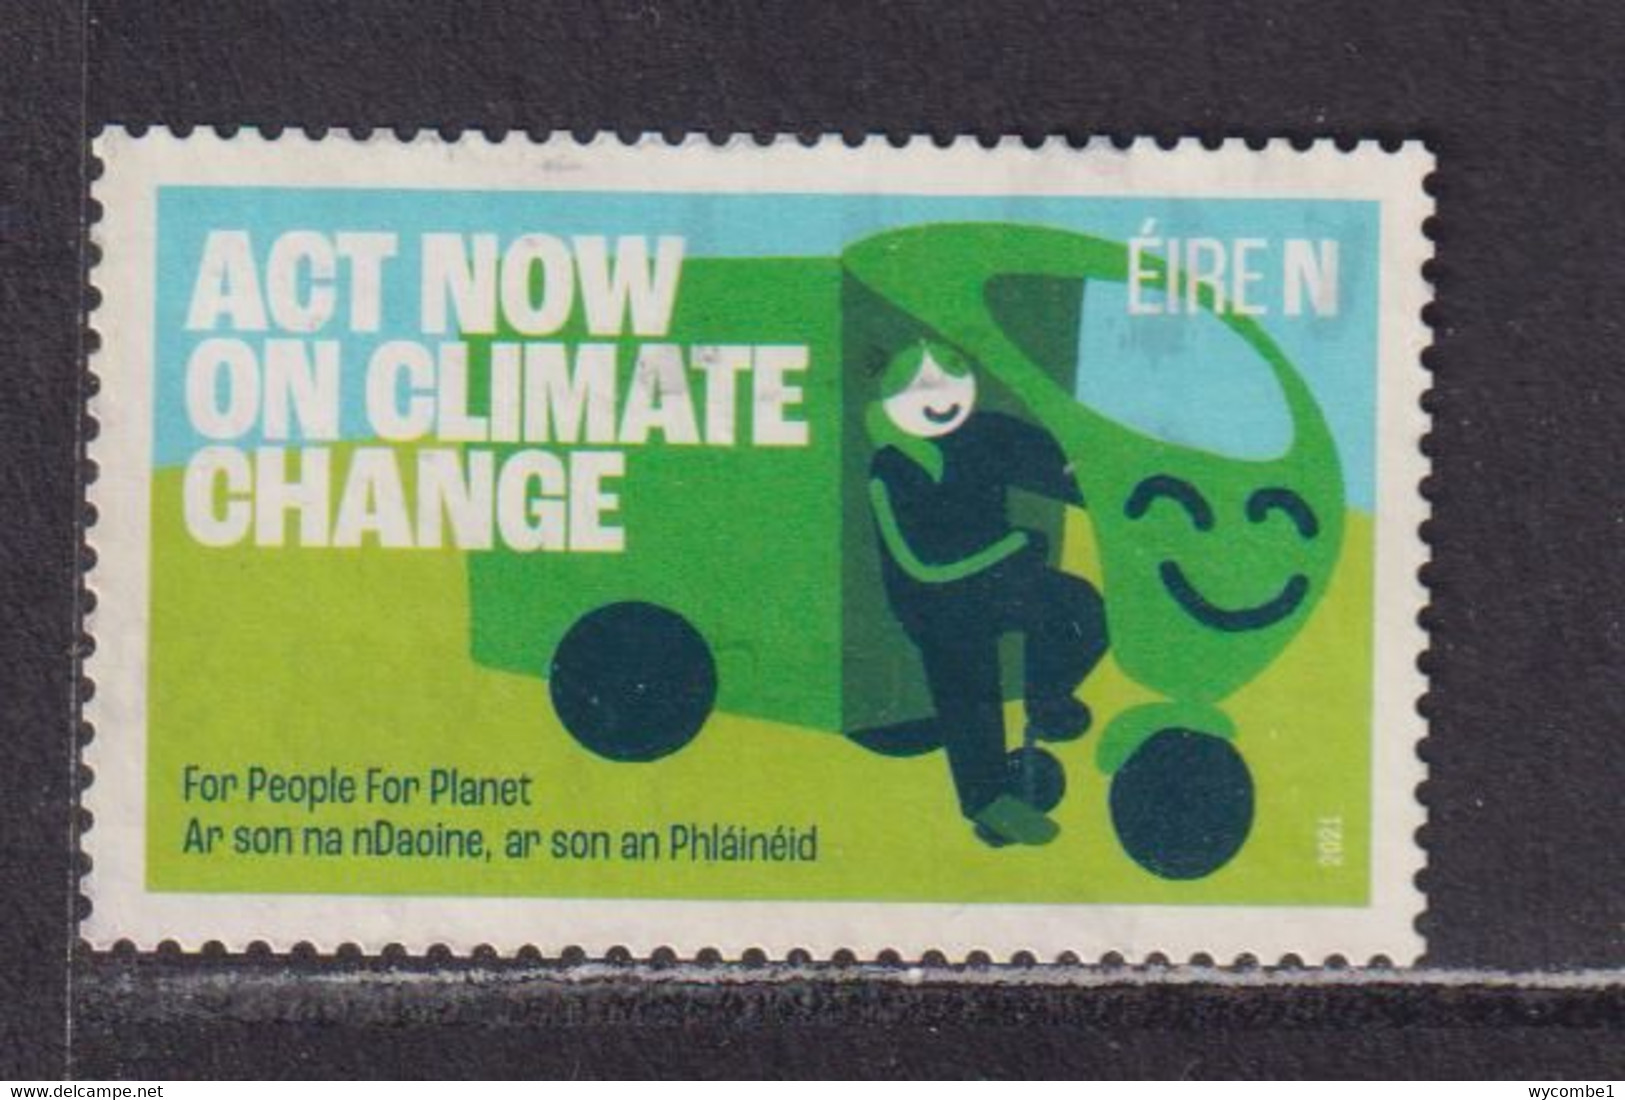 IRELAND - 2021 Climate Change 'N'  Used As Scan - Used Stamps